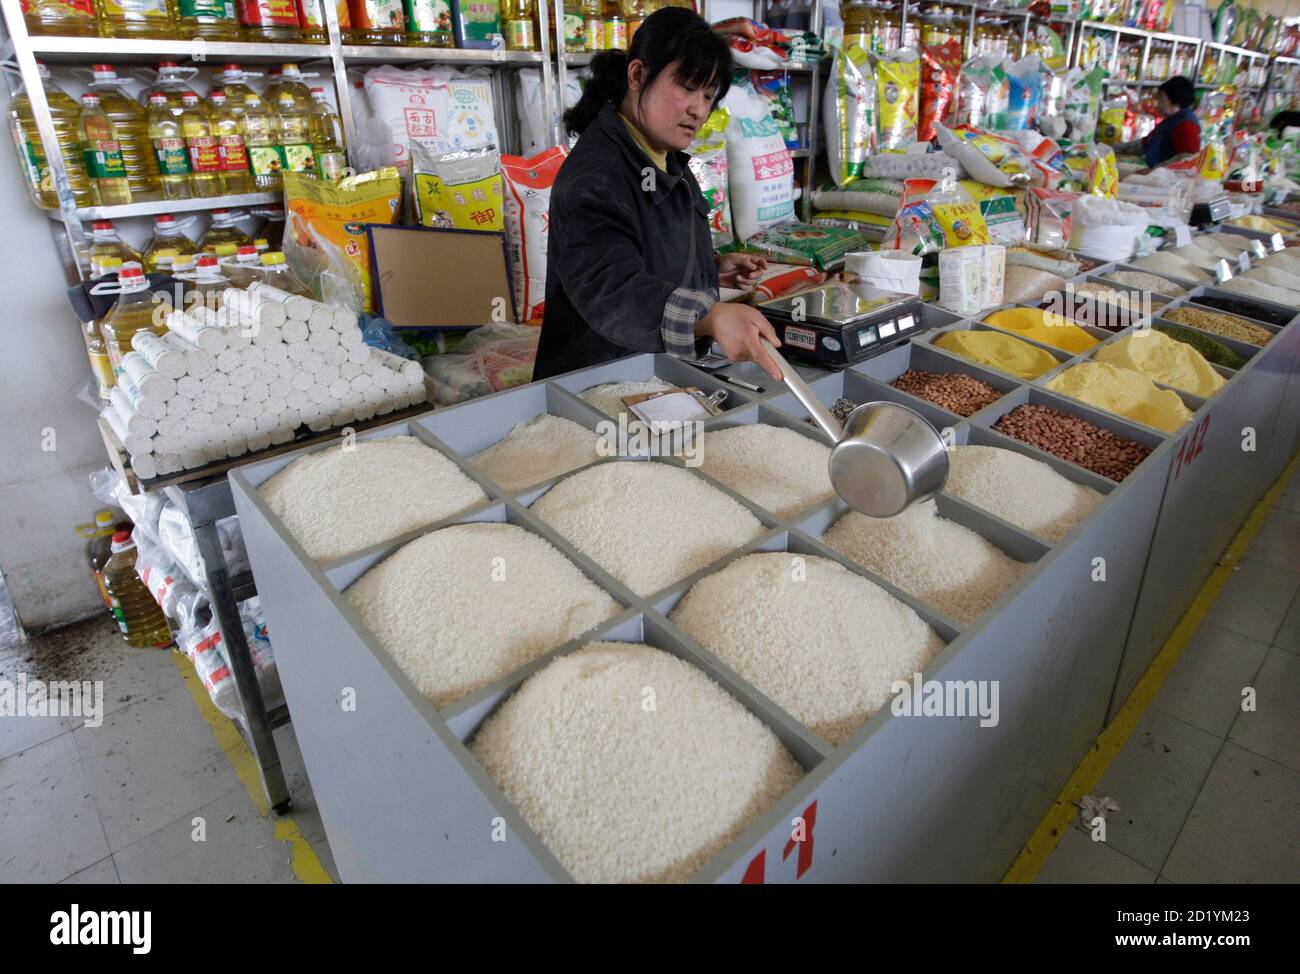 A vendor sells rice at a market in Beijing April 3, 2008. World rice production is set to increase by 1.8 percent this year as government incentives and high prices spur output in Asia and Africa, the United Nations Food and Agriculture Organisation (FAO) said on Wednesday. REUTERS/Jason Lee (CHINA) Stock Photo